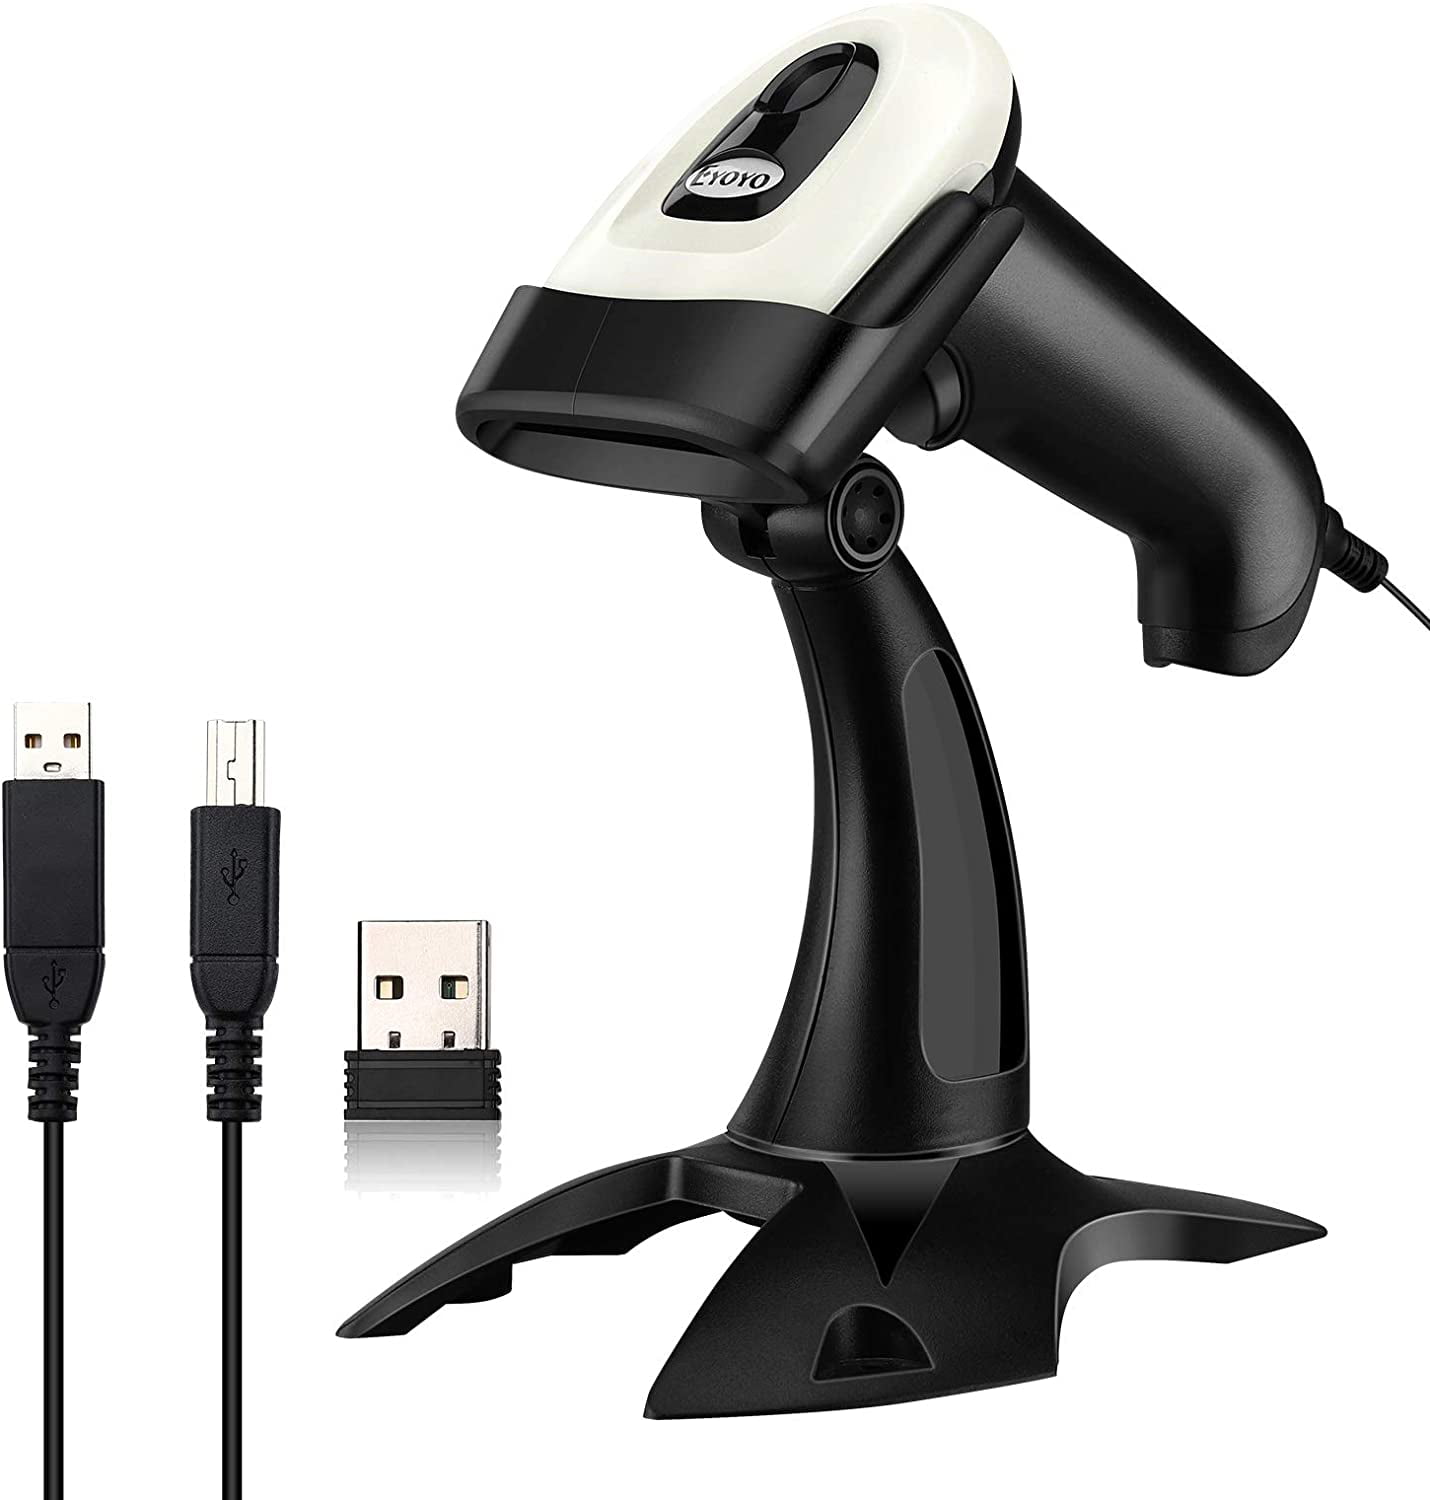 Eyoyo QR 2D 1D Barcode Scanner USB Wired Handheld For Linux Windows xp/7/8/10 UK 